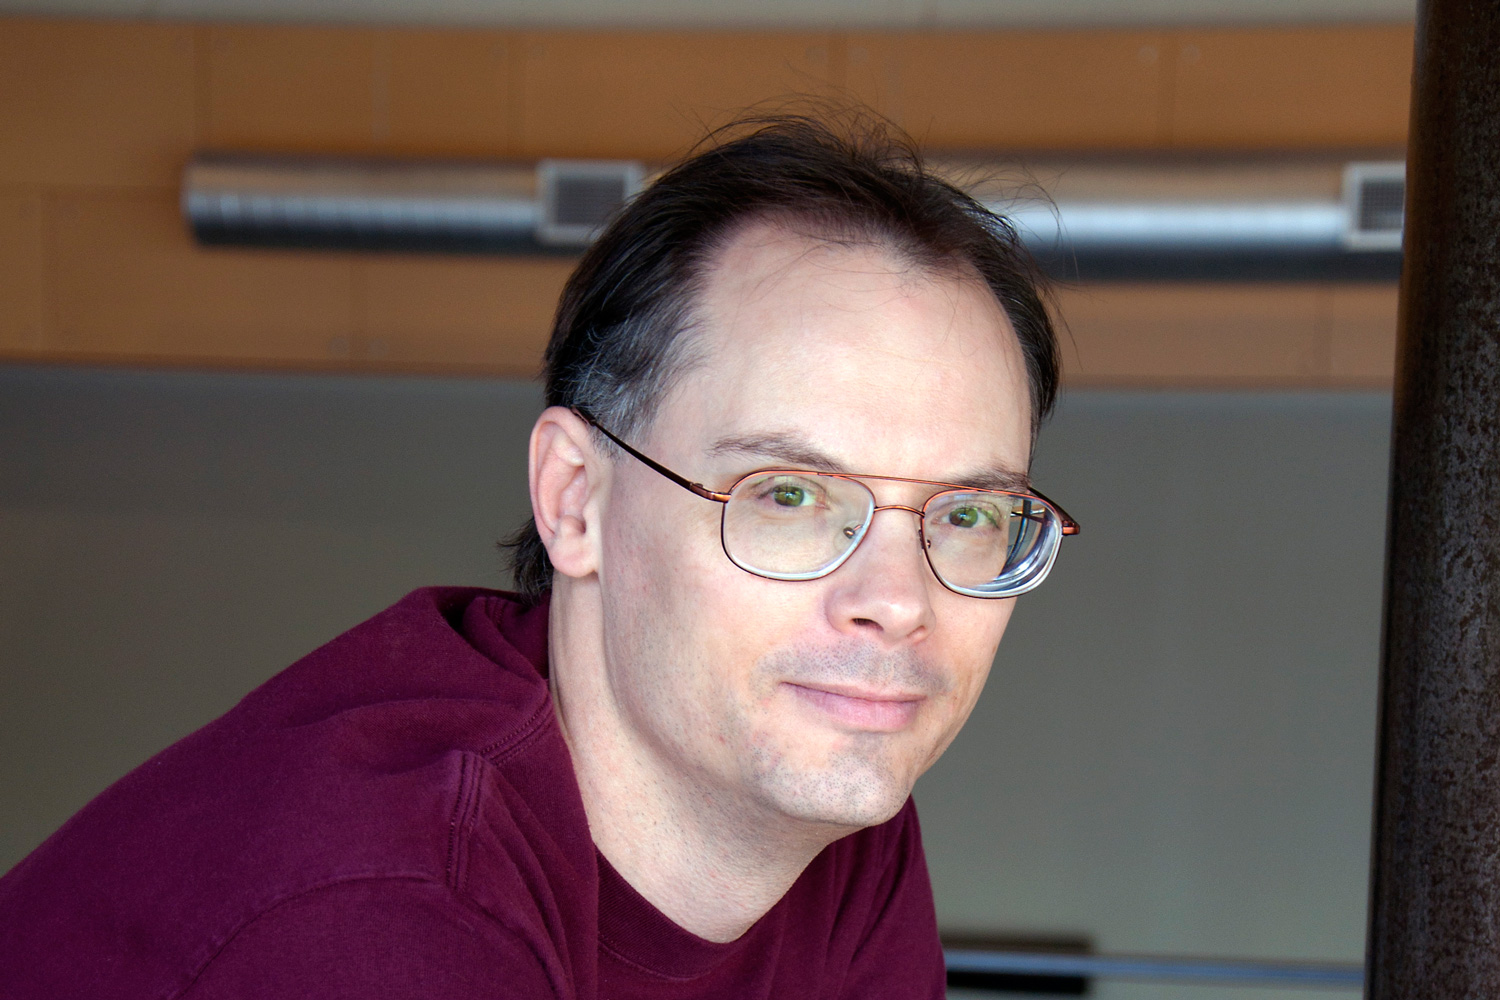 epic games tim sweeney htc vive outselling oculus rift